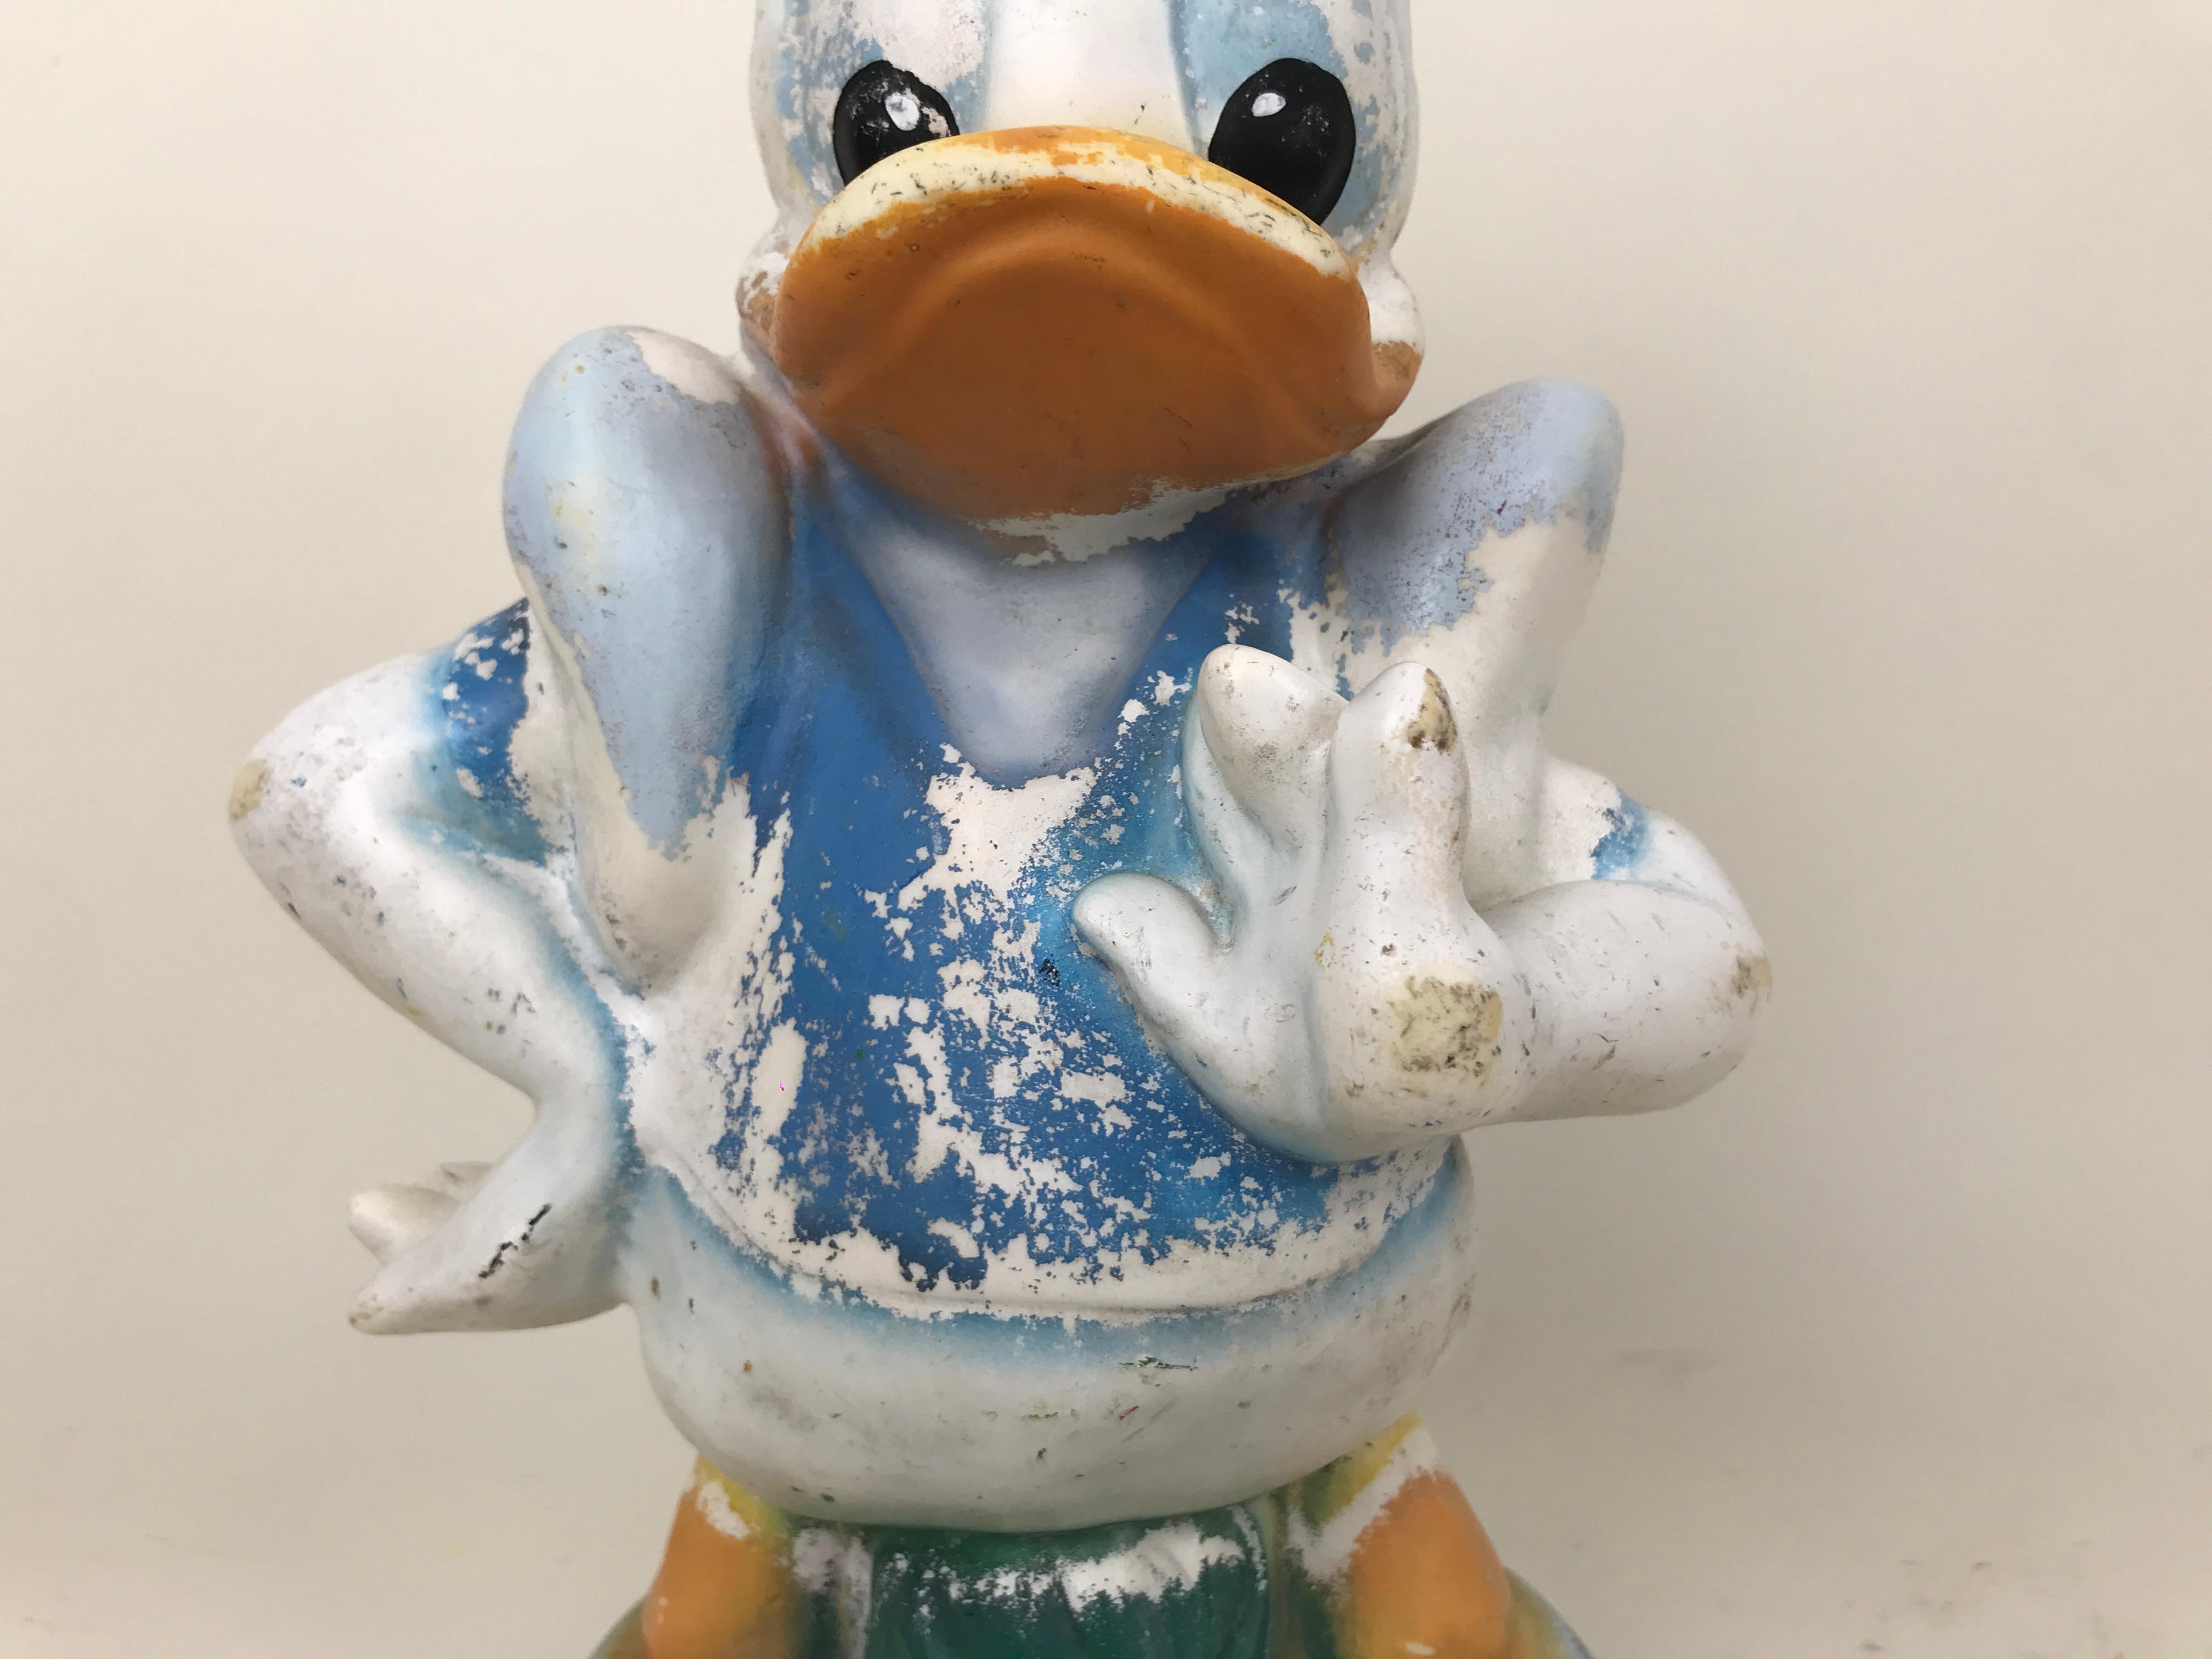 1990s Vintage Disney Daisy Duck Plastic Sculpture Made in Austria by Celloplast In Good Condition For Sale In Milan, IT